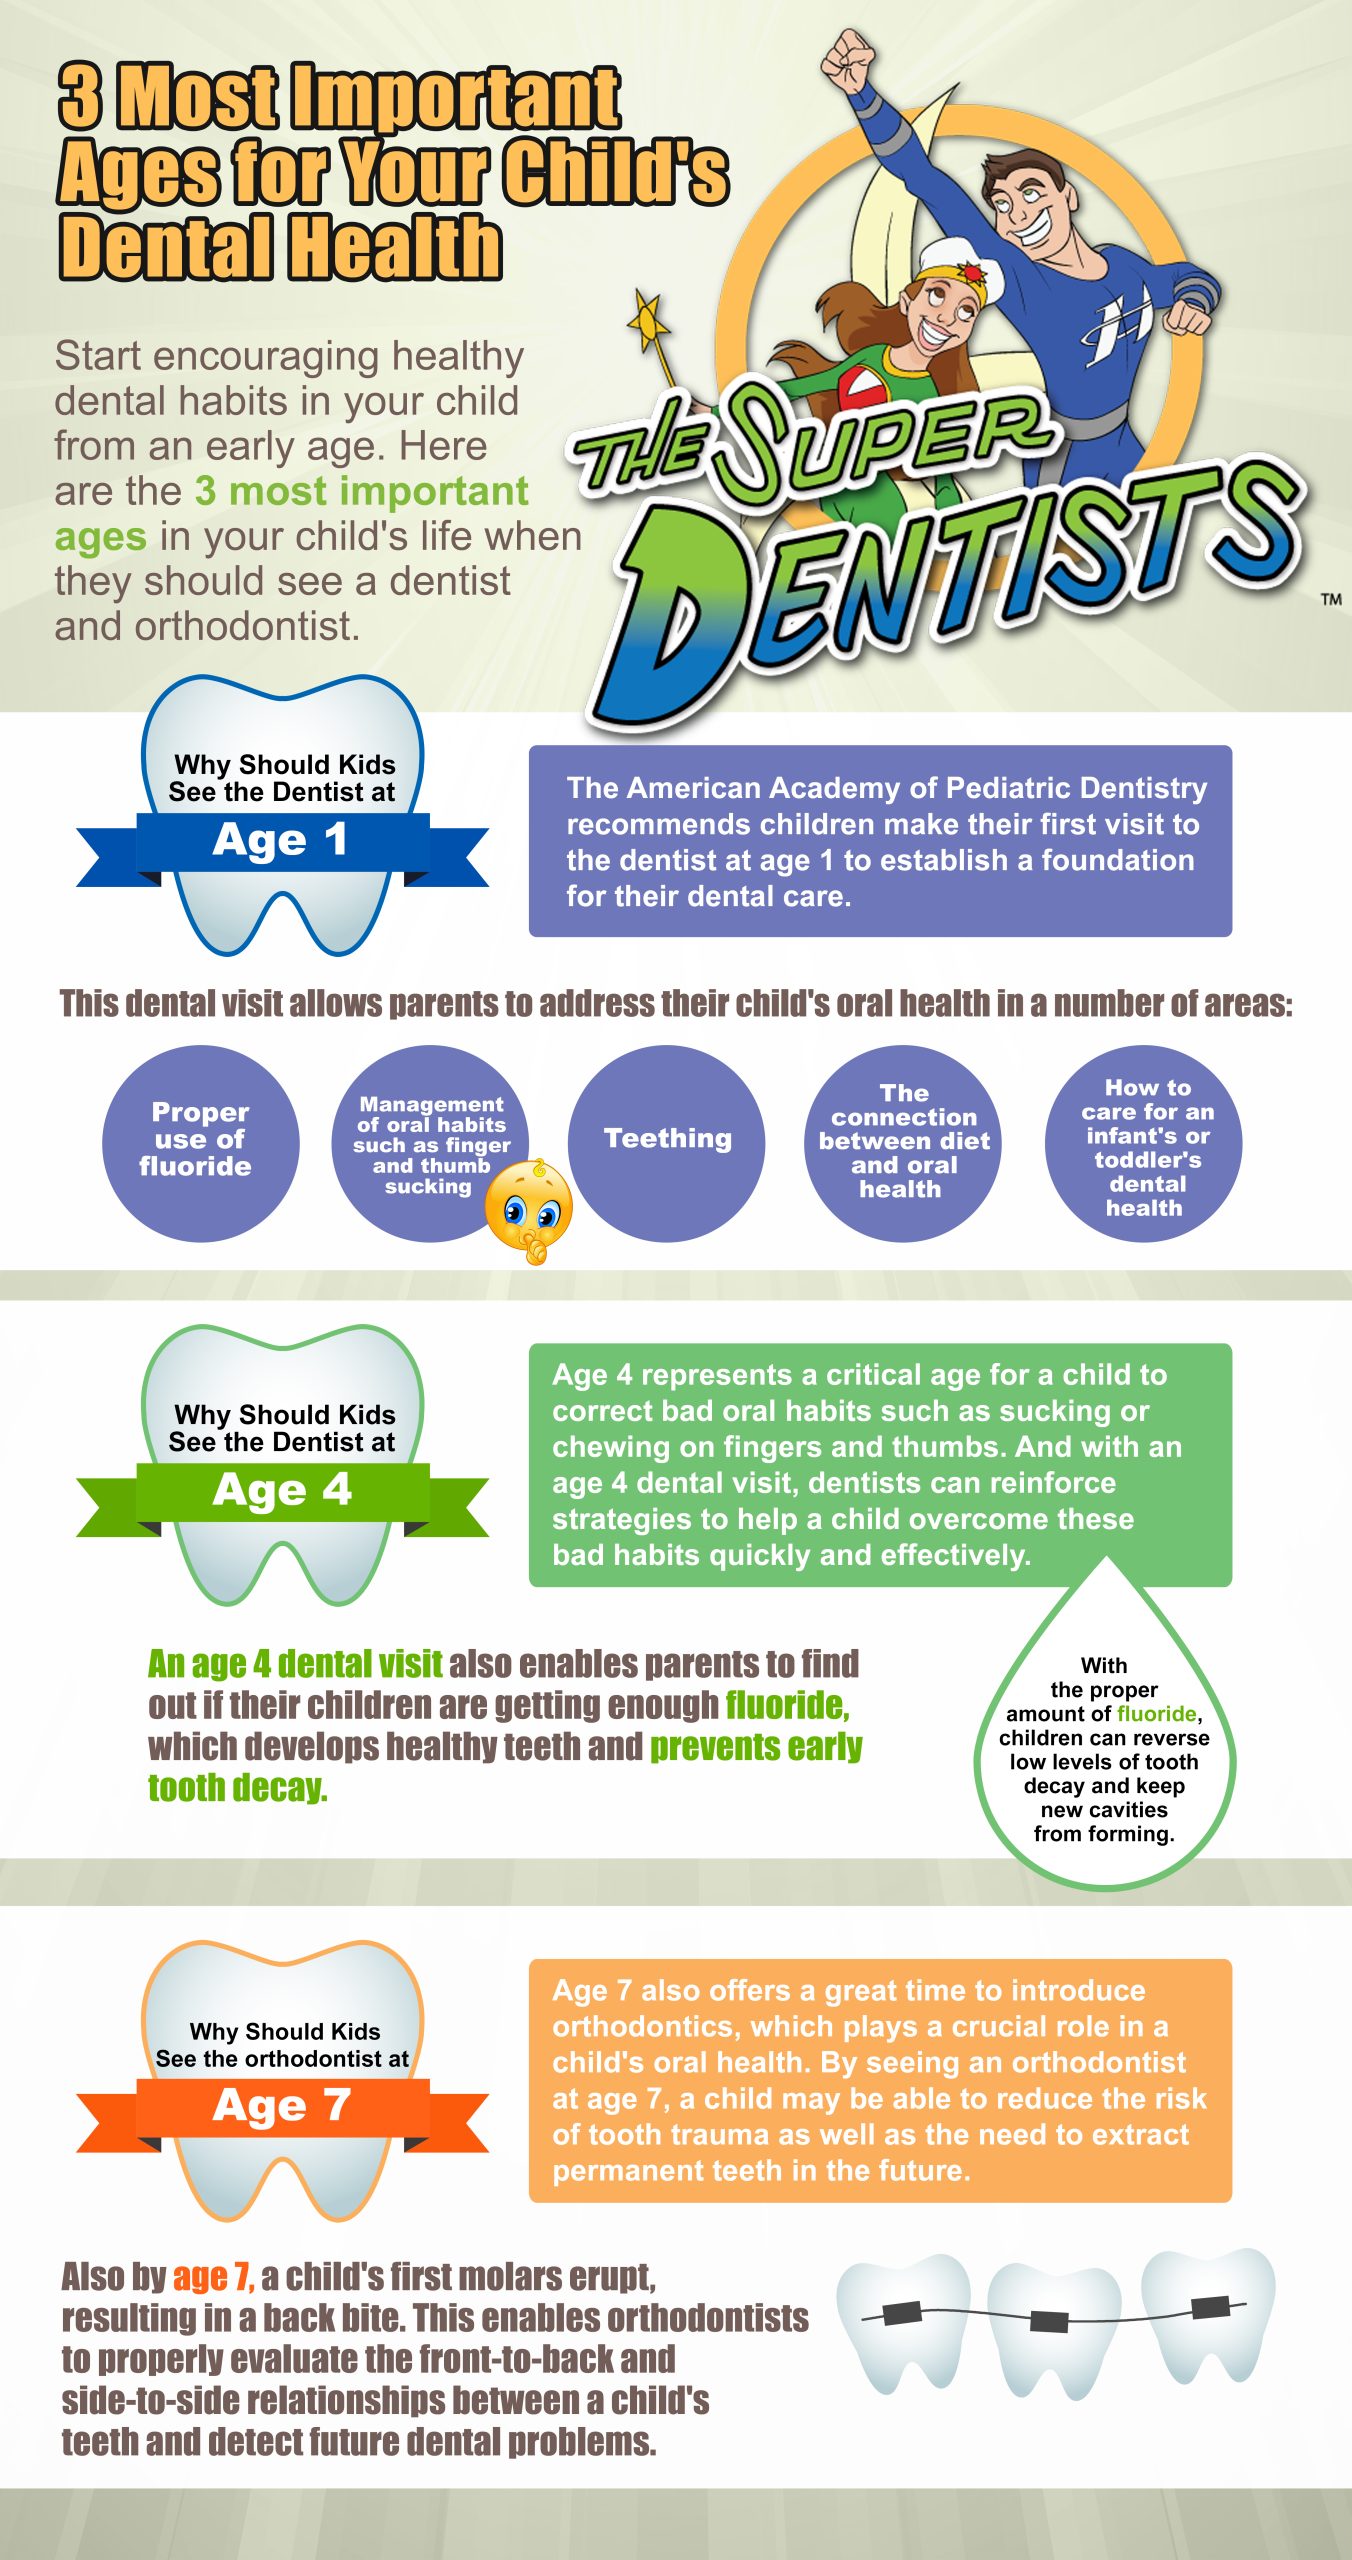 When Should You Start Taking Your Child to the Dentist?